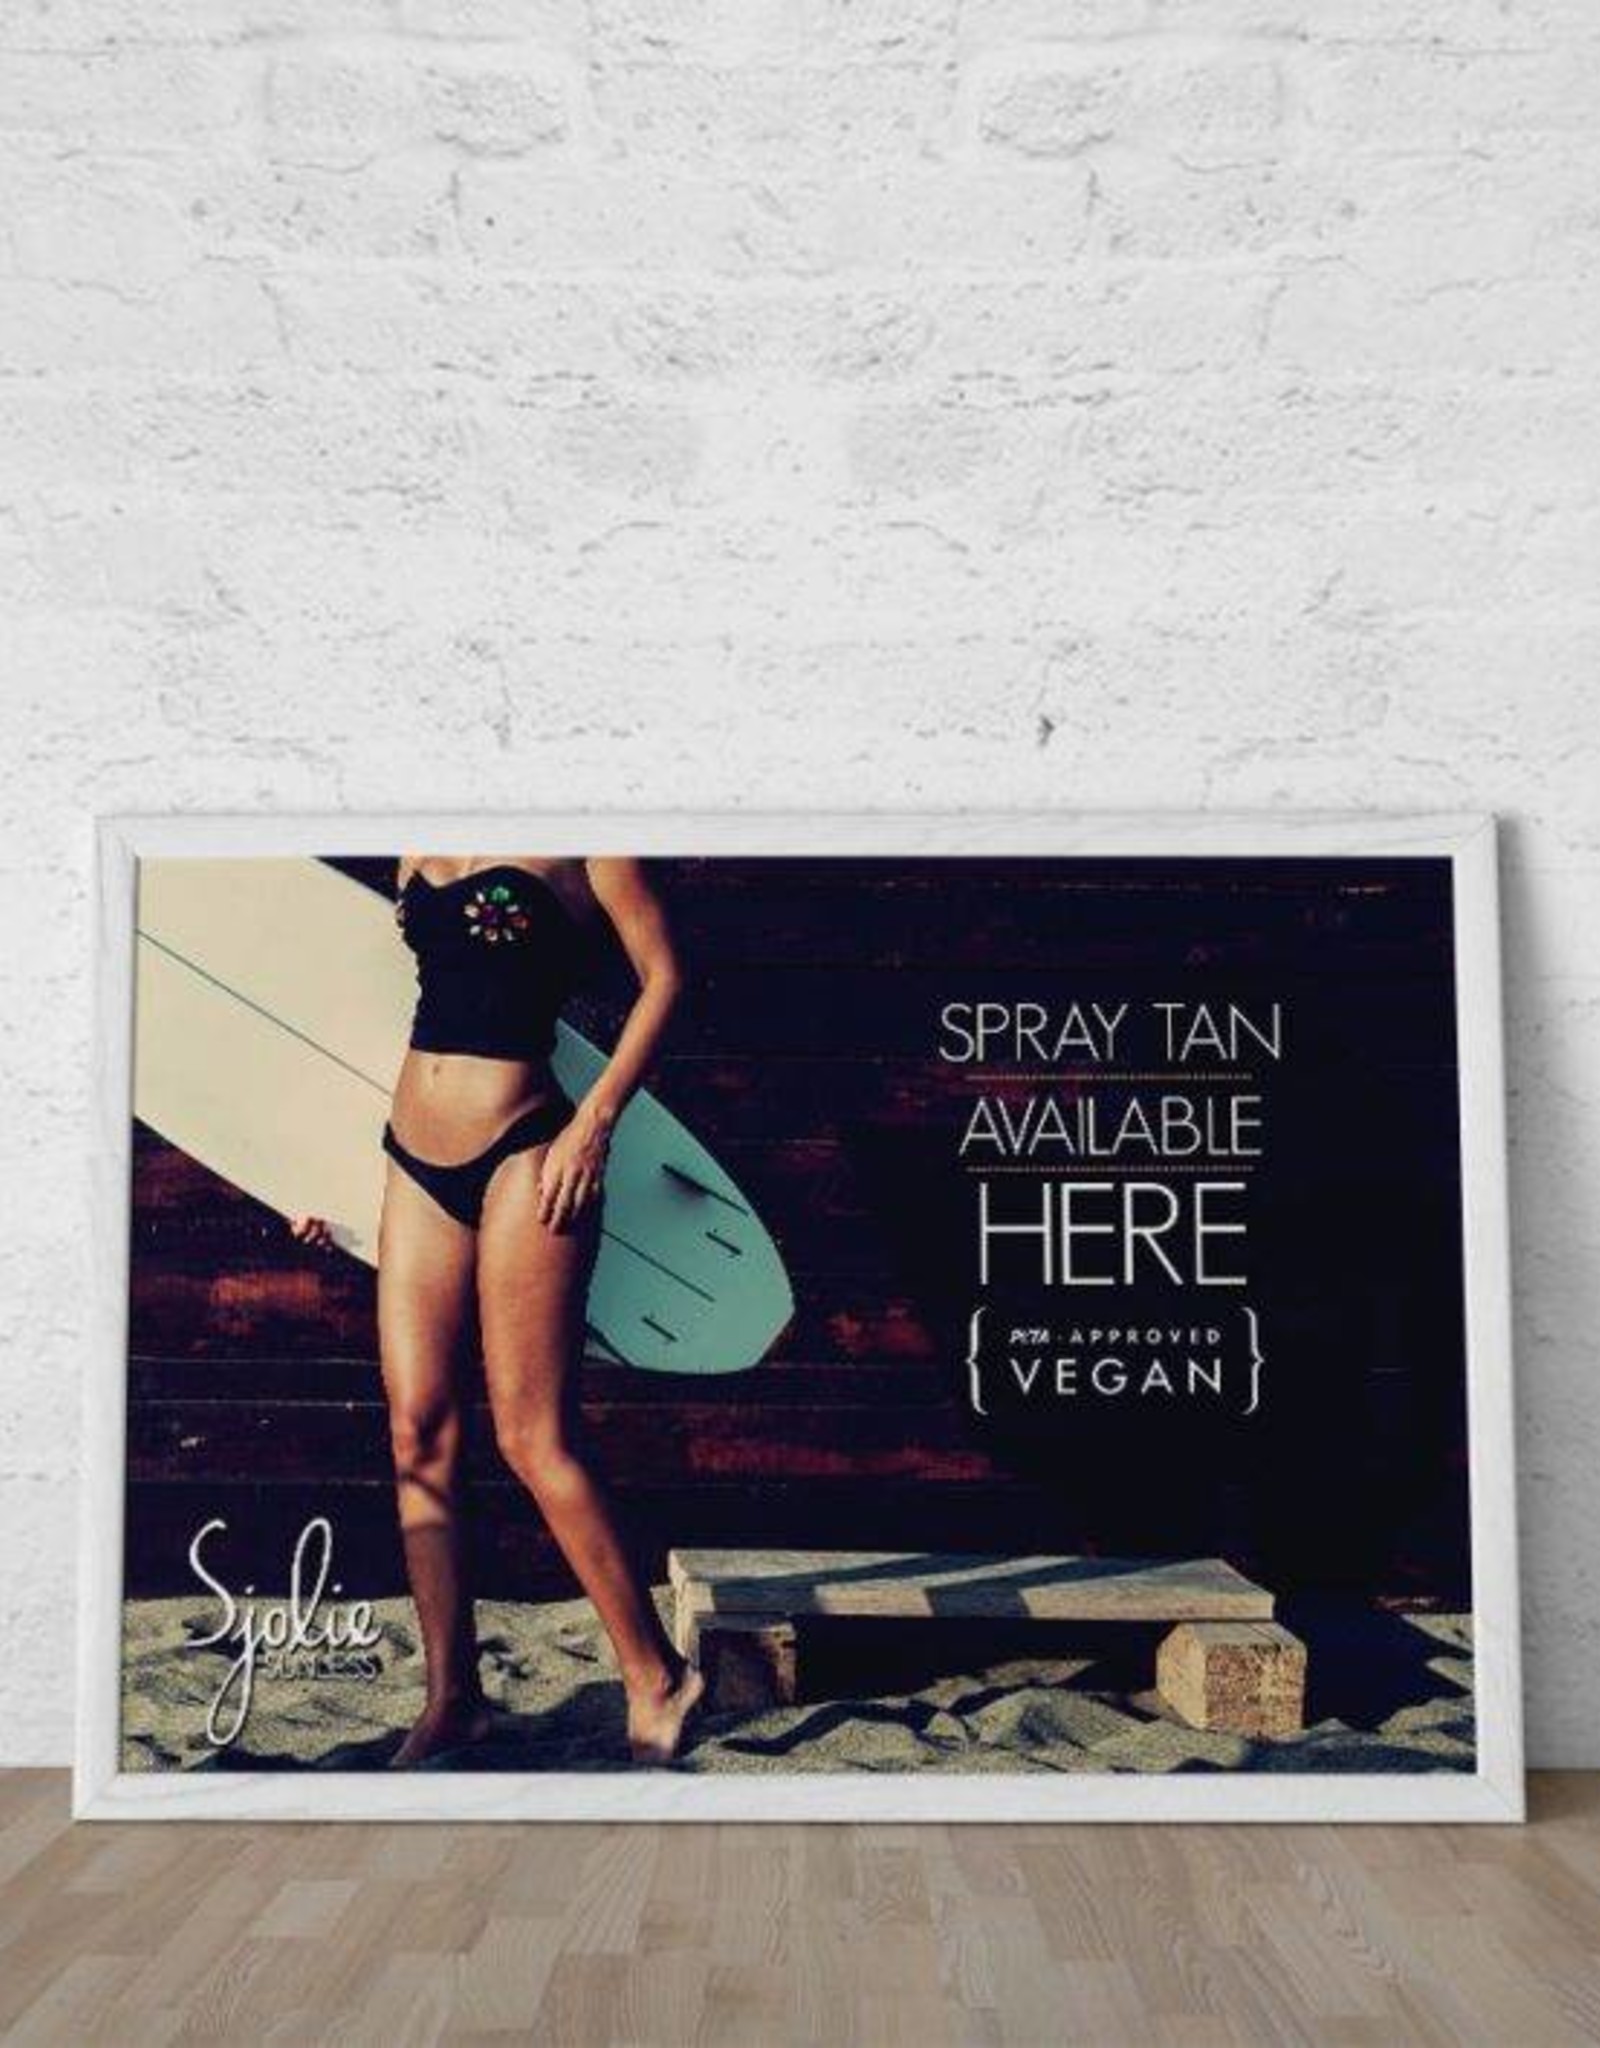 Sjolie Sjolie promotie poster A2 -Spray Tan Available Here